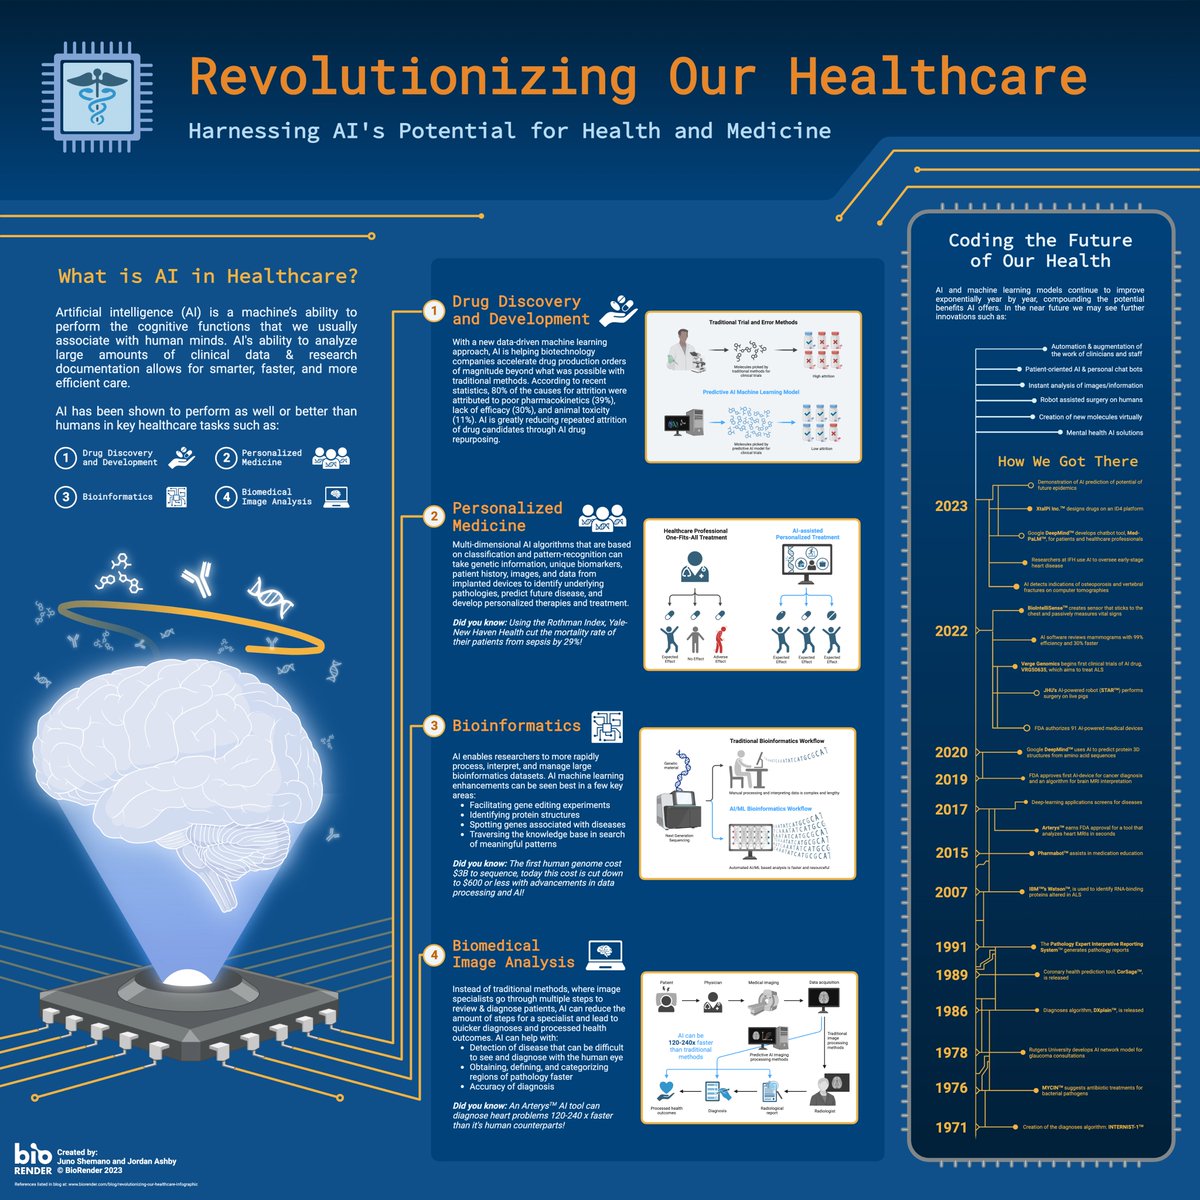 📣Check out our latest blog post on revolutionizing healthcare with AI! Discover how AI is transforming the healthcare industry and improving patient outcomes. Plus, get the fully-editable infographic in BioRender: biorender.com/blog/revolutio… #AI #Healthcare #HealthcareInnovation